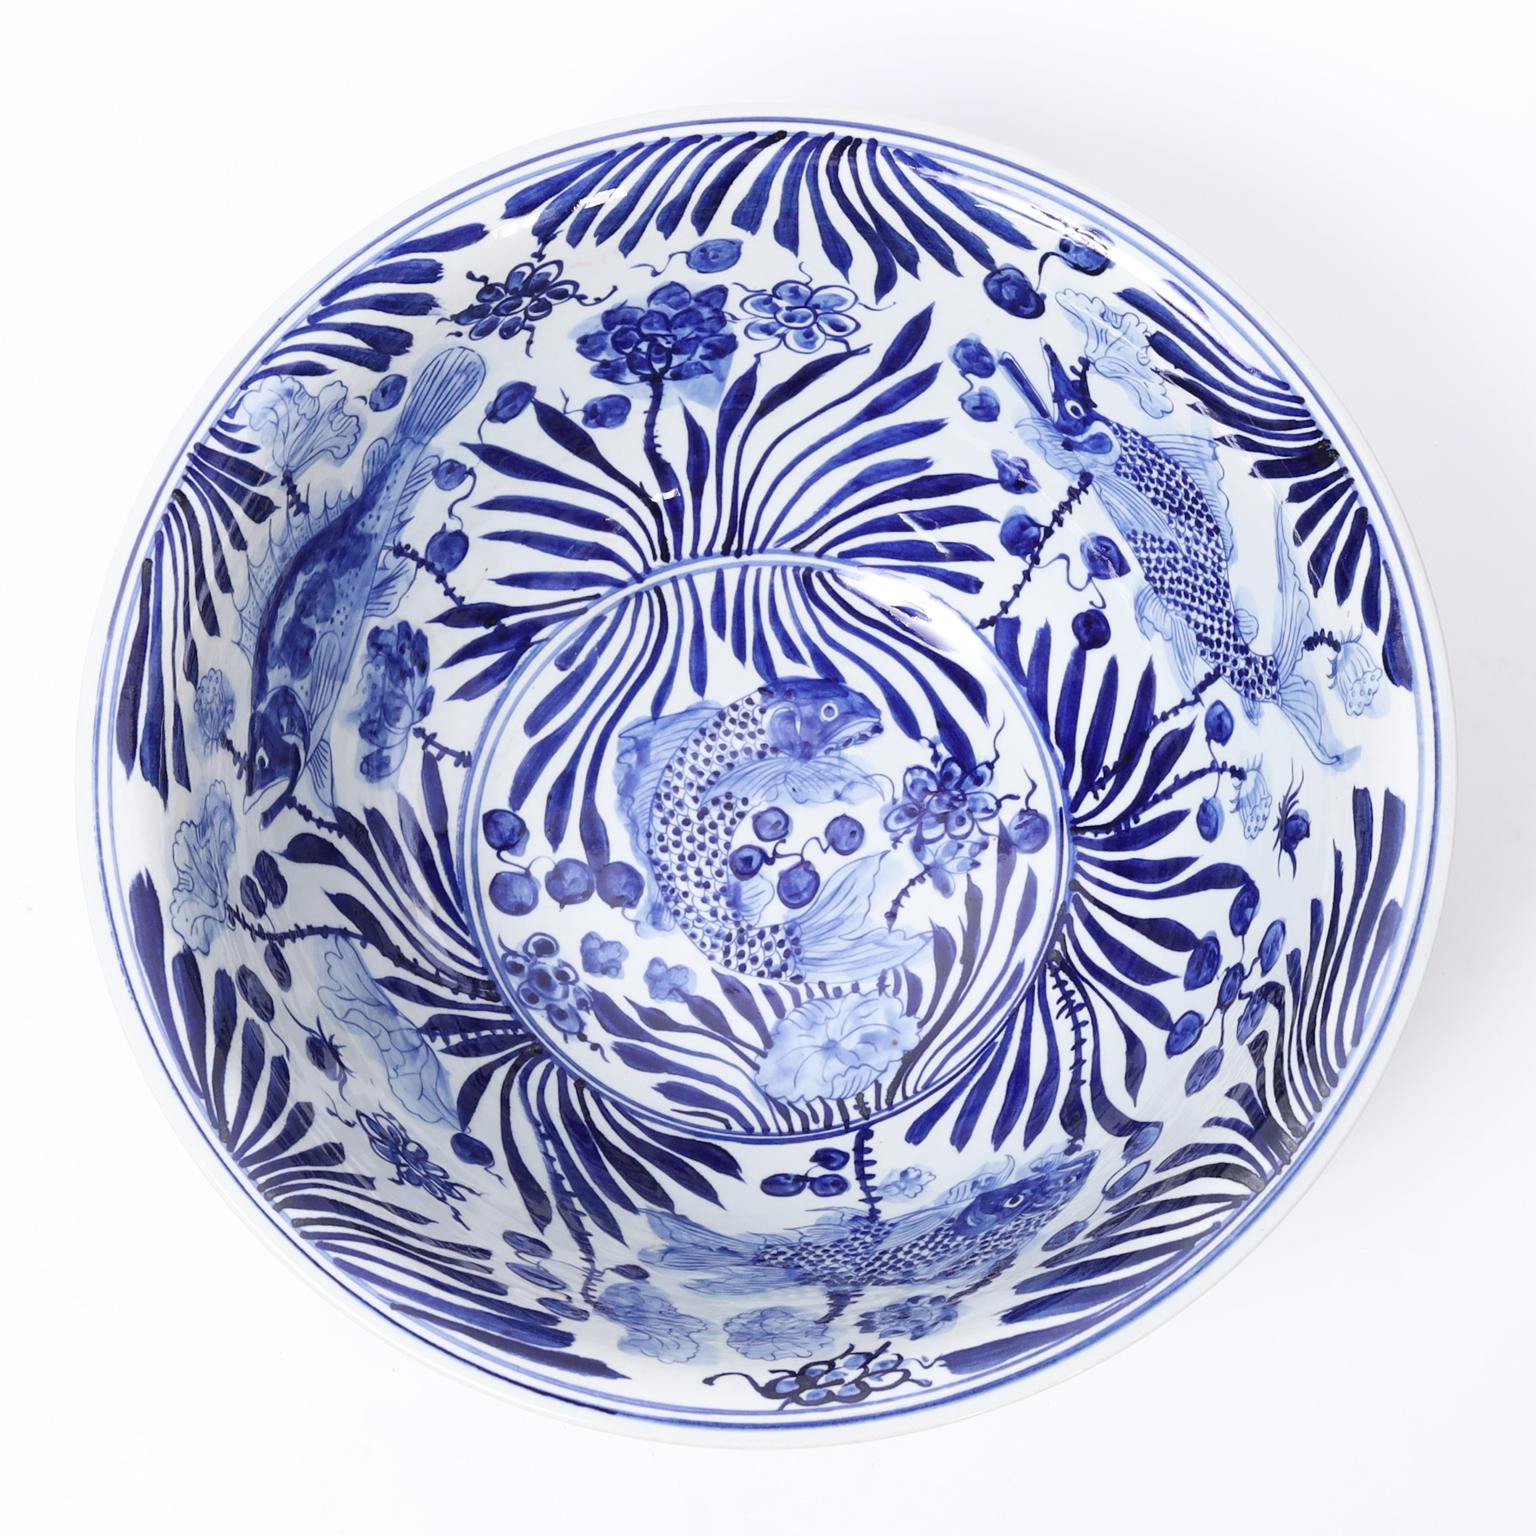 Glazed Chinese Export Large Blue and White Porcelain Aquatic Bowl For Sale